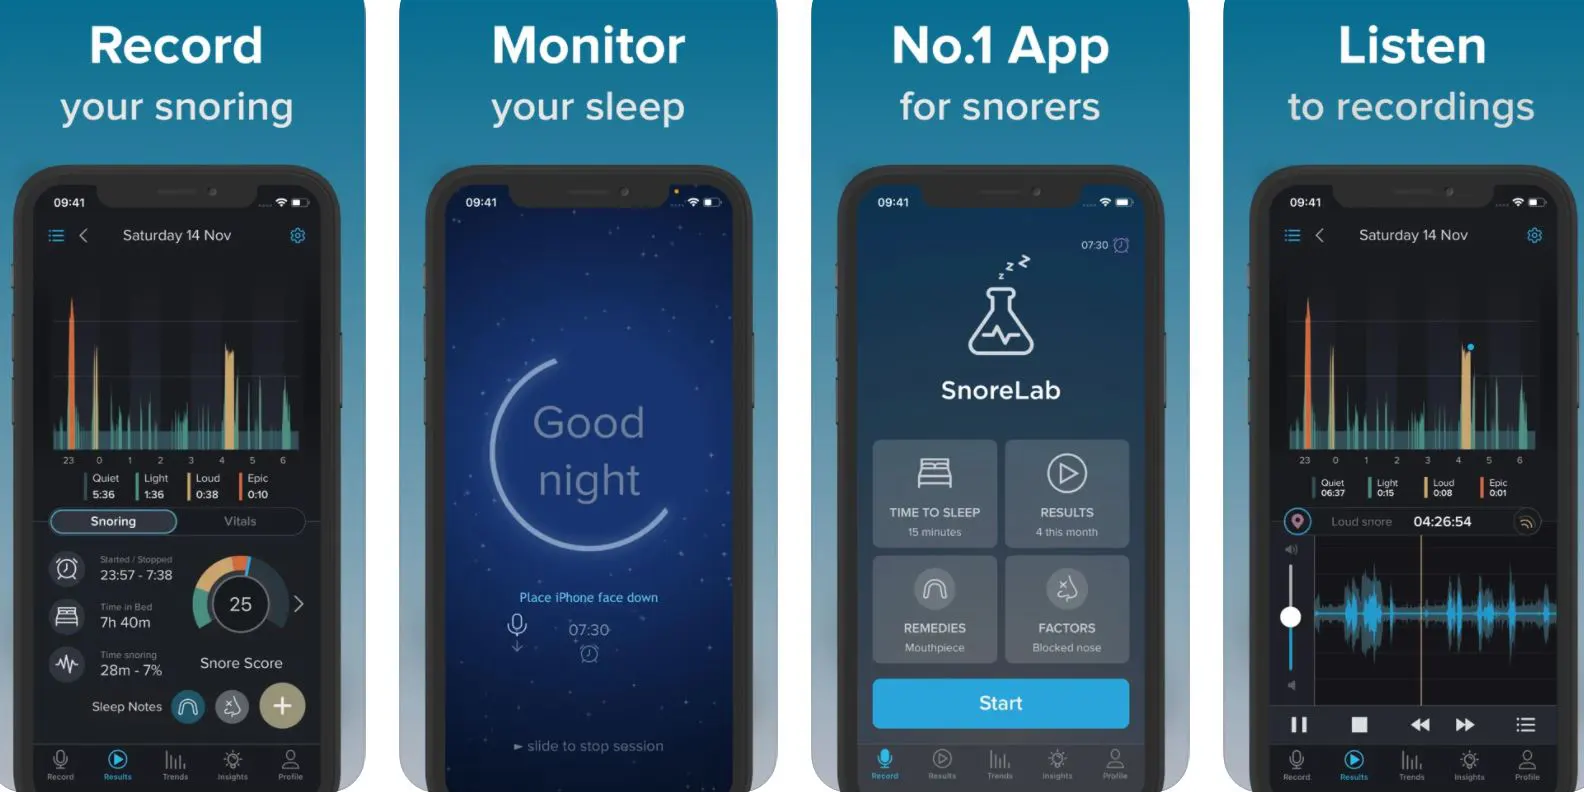 Best Snoring Apps To Monitor Your Snoring 1